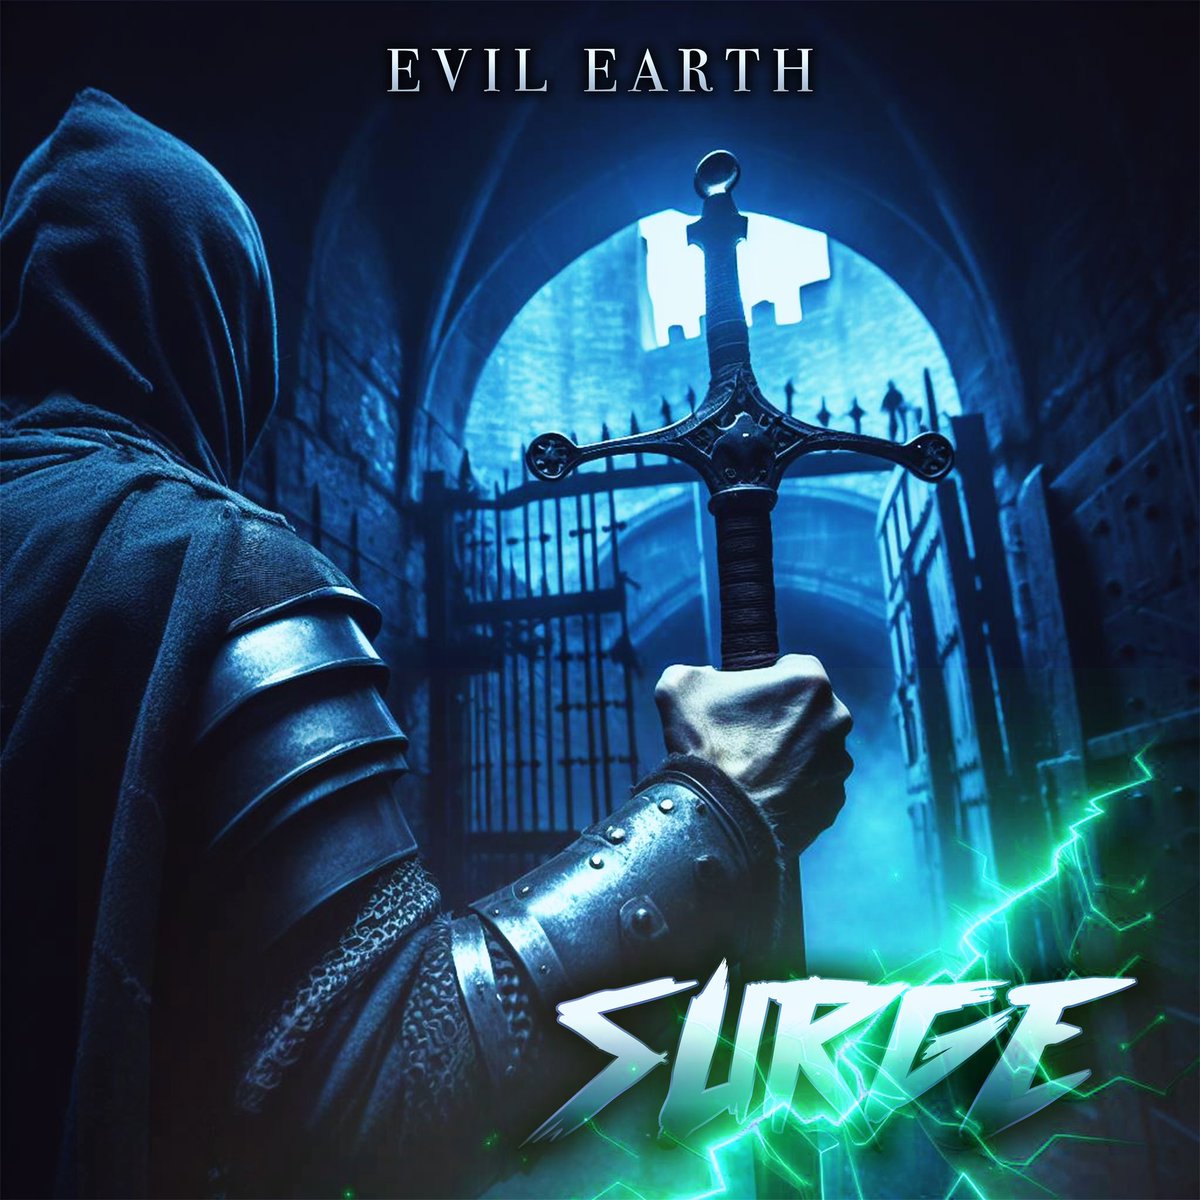 Evil Earth is now on Spotify and other streaming platforms. Check it out! #80s #synthwave #retrowave #fantasyrpg #fantasy #castlevania #retrogaming #80spopculture open.spotify.com/album/4aJyxsCO…